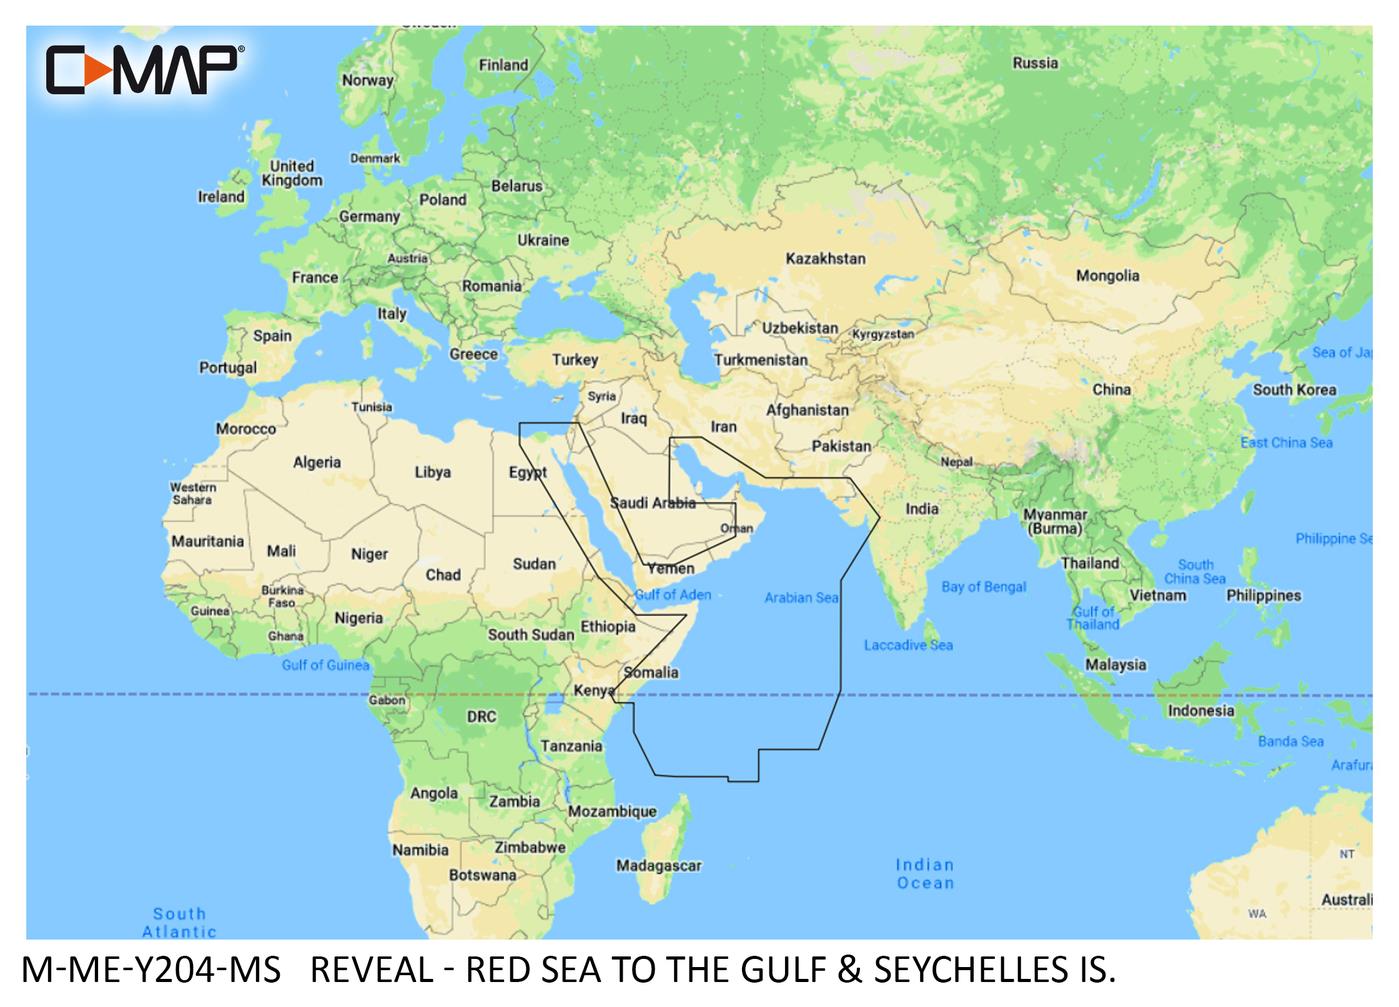 C-MAP Reveal Red Sea to the Gulf and Seychelles IS. M-ME-Y204-MS